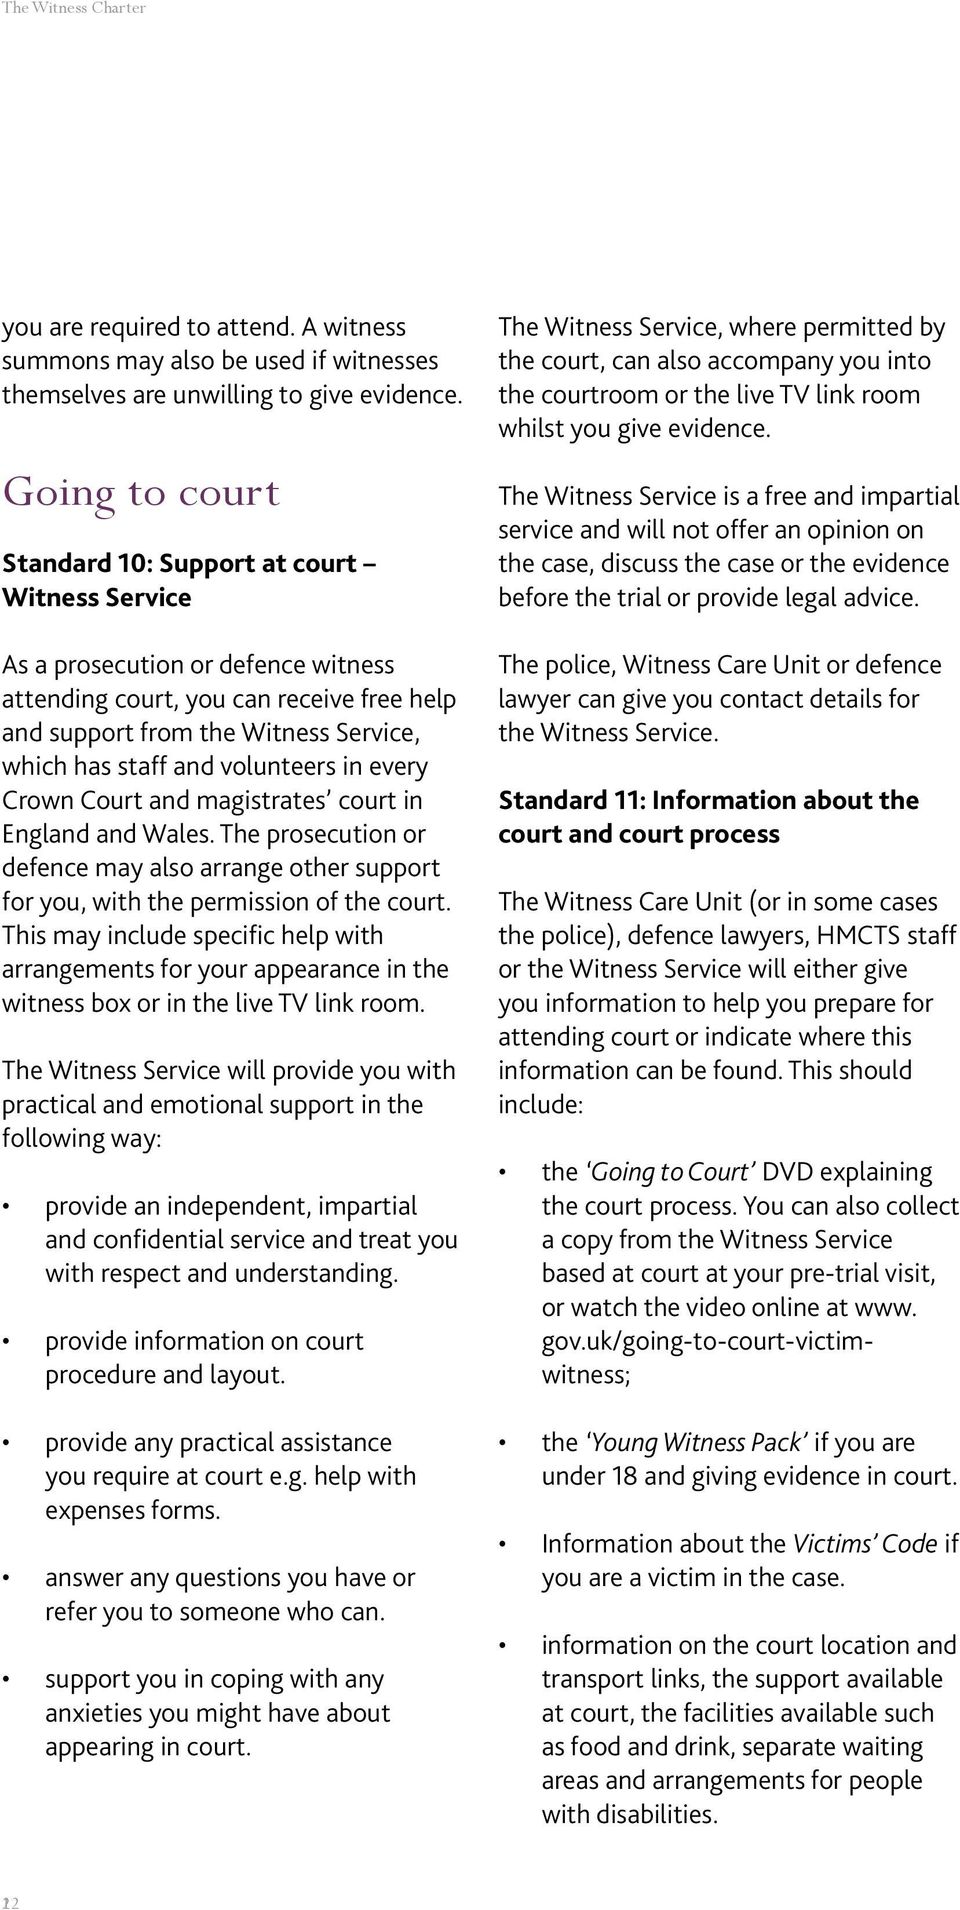 volunteers in every Crown Court and magistrates court in England and Wales. The prosecution or defence may also arrange other support for you, with the permission of the court.